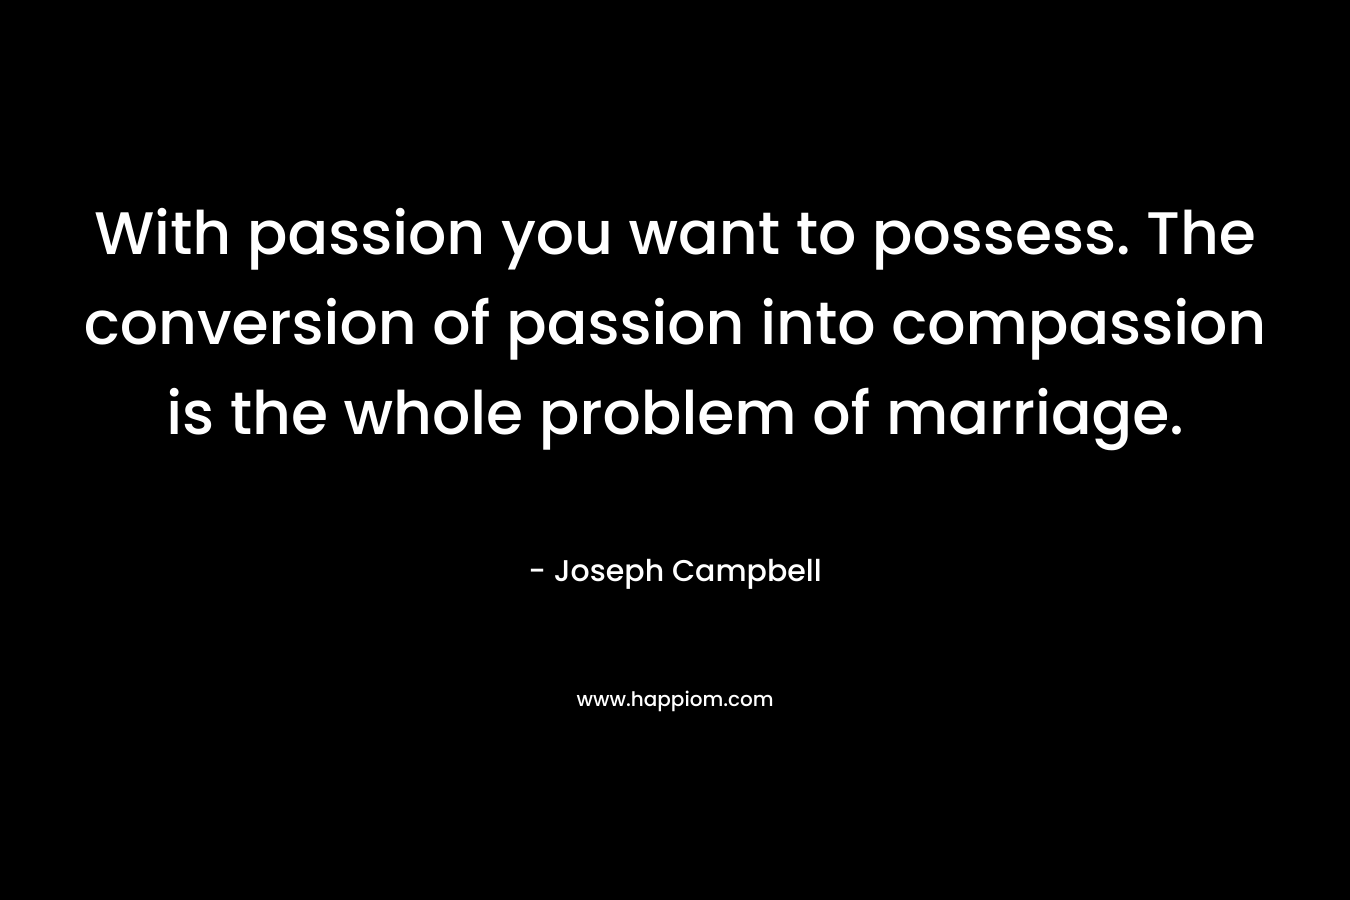 With passion you want to possess. The conversion of passion into compassion is the whole problem of marriage. – Joseph Campbell